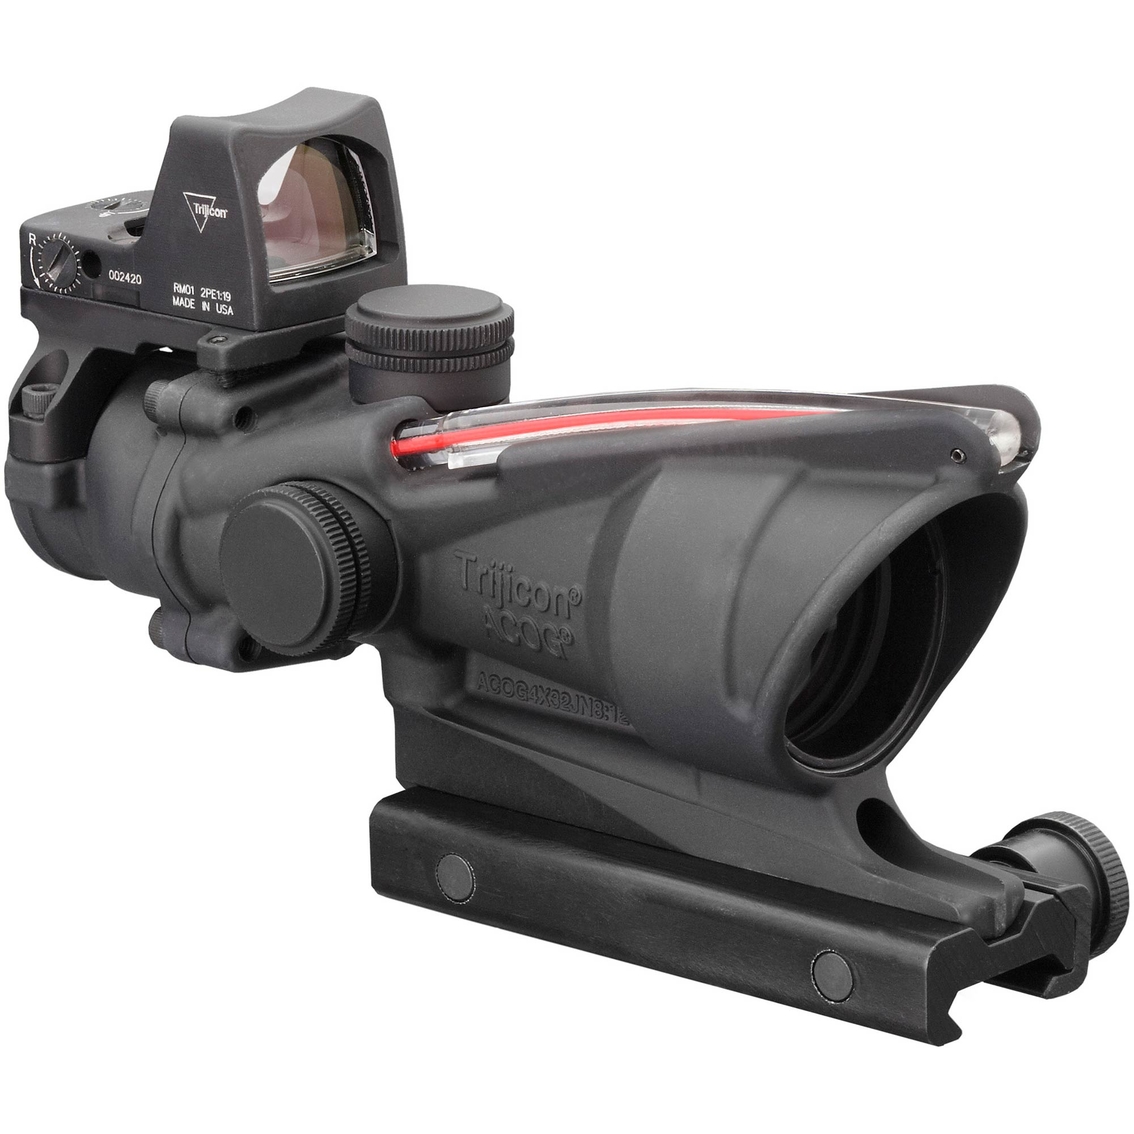 Trijicon ACOG 4x32 Red CV 223 Sight with RMR - Image 2 of 5